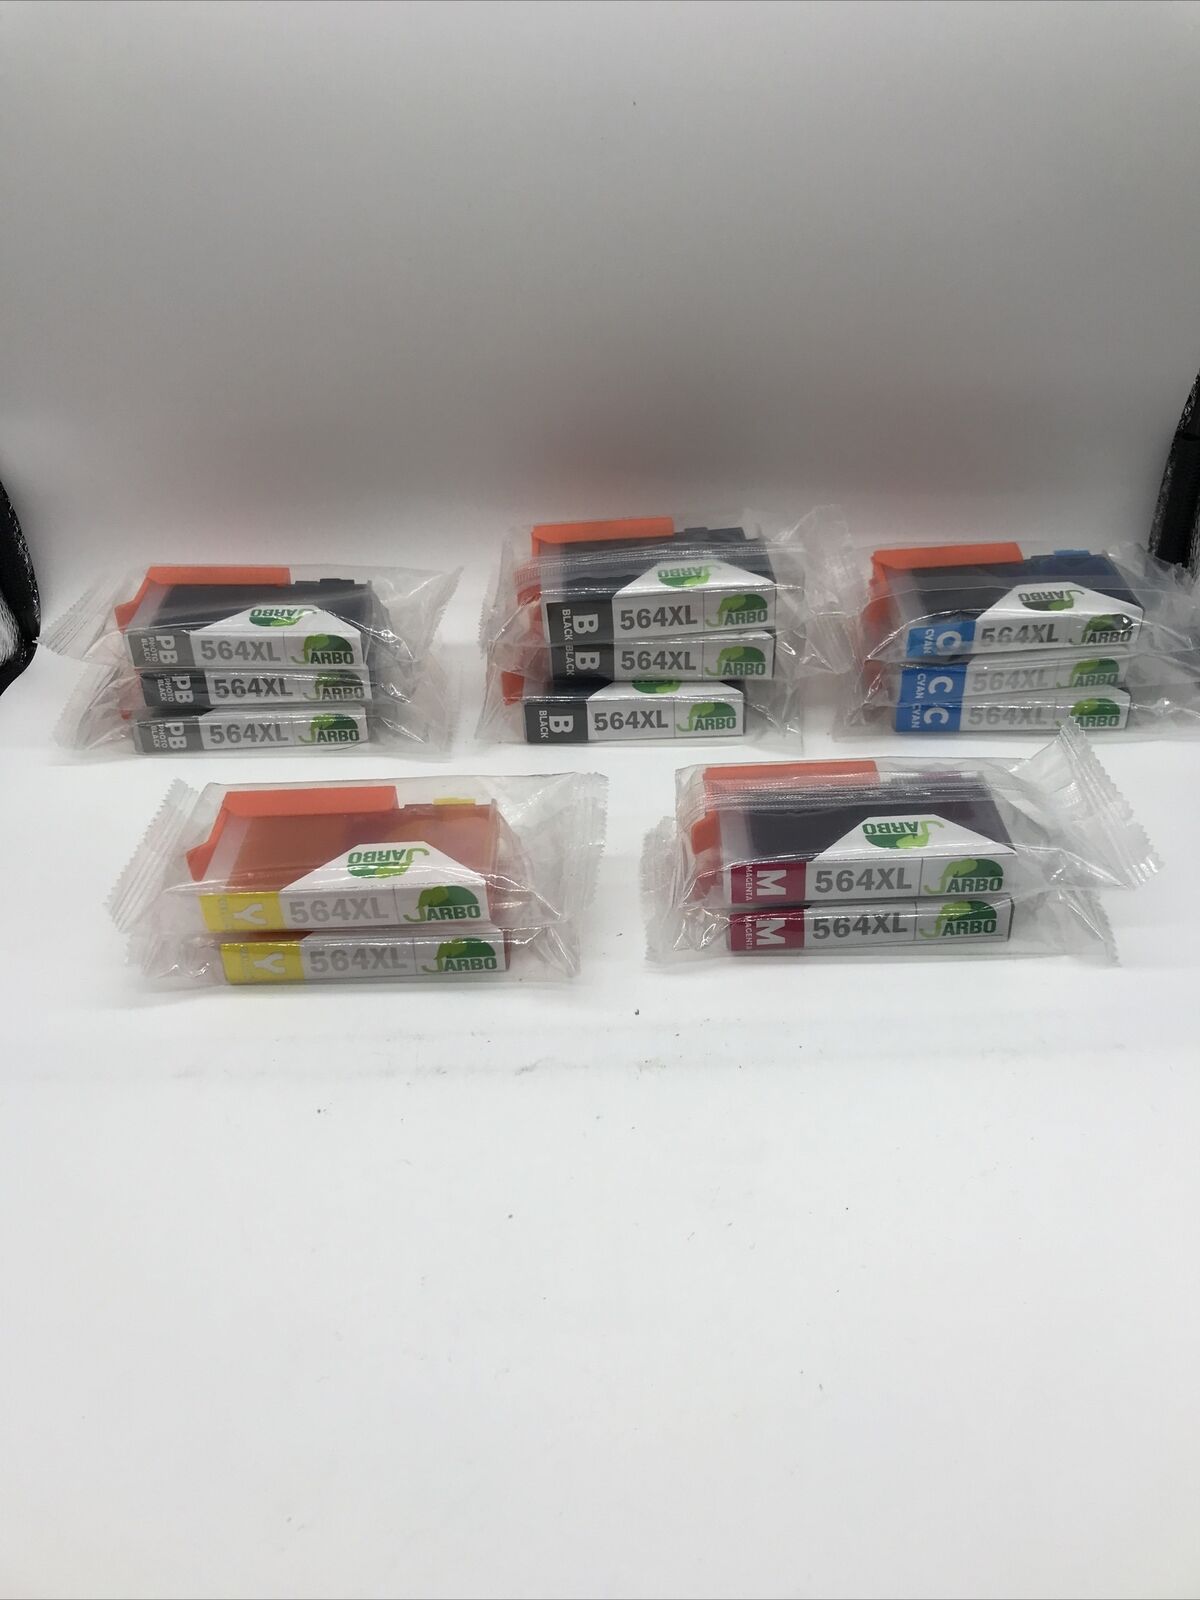 13 JARBO Compatible for HP 564XL Ink Cartridges, HP Photosmart NEW